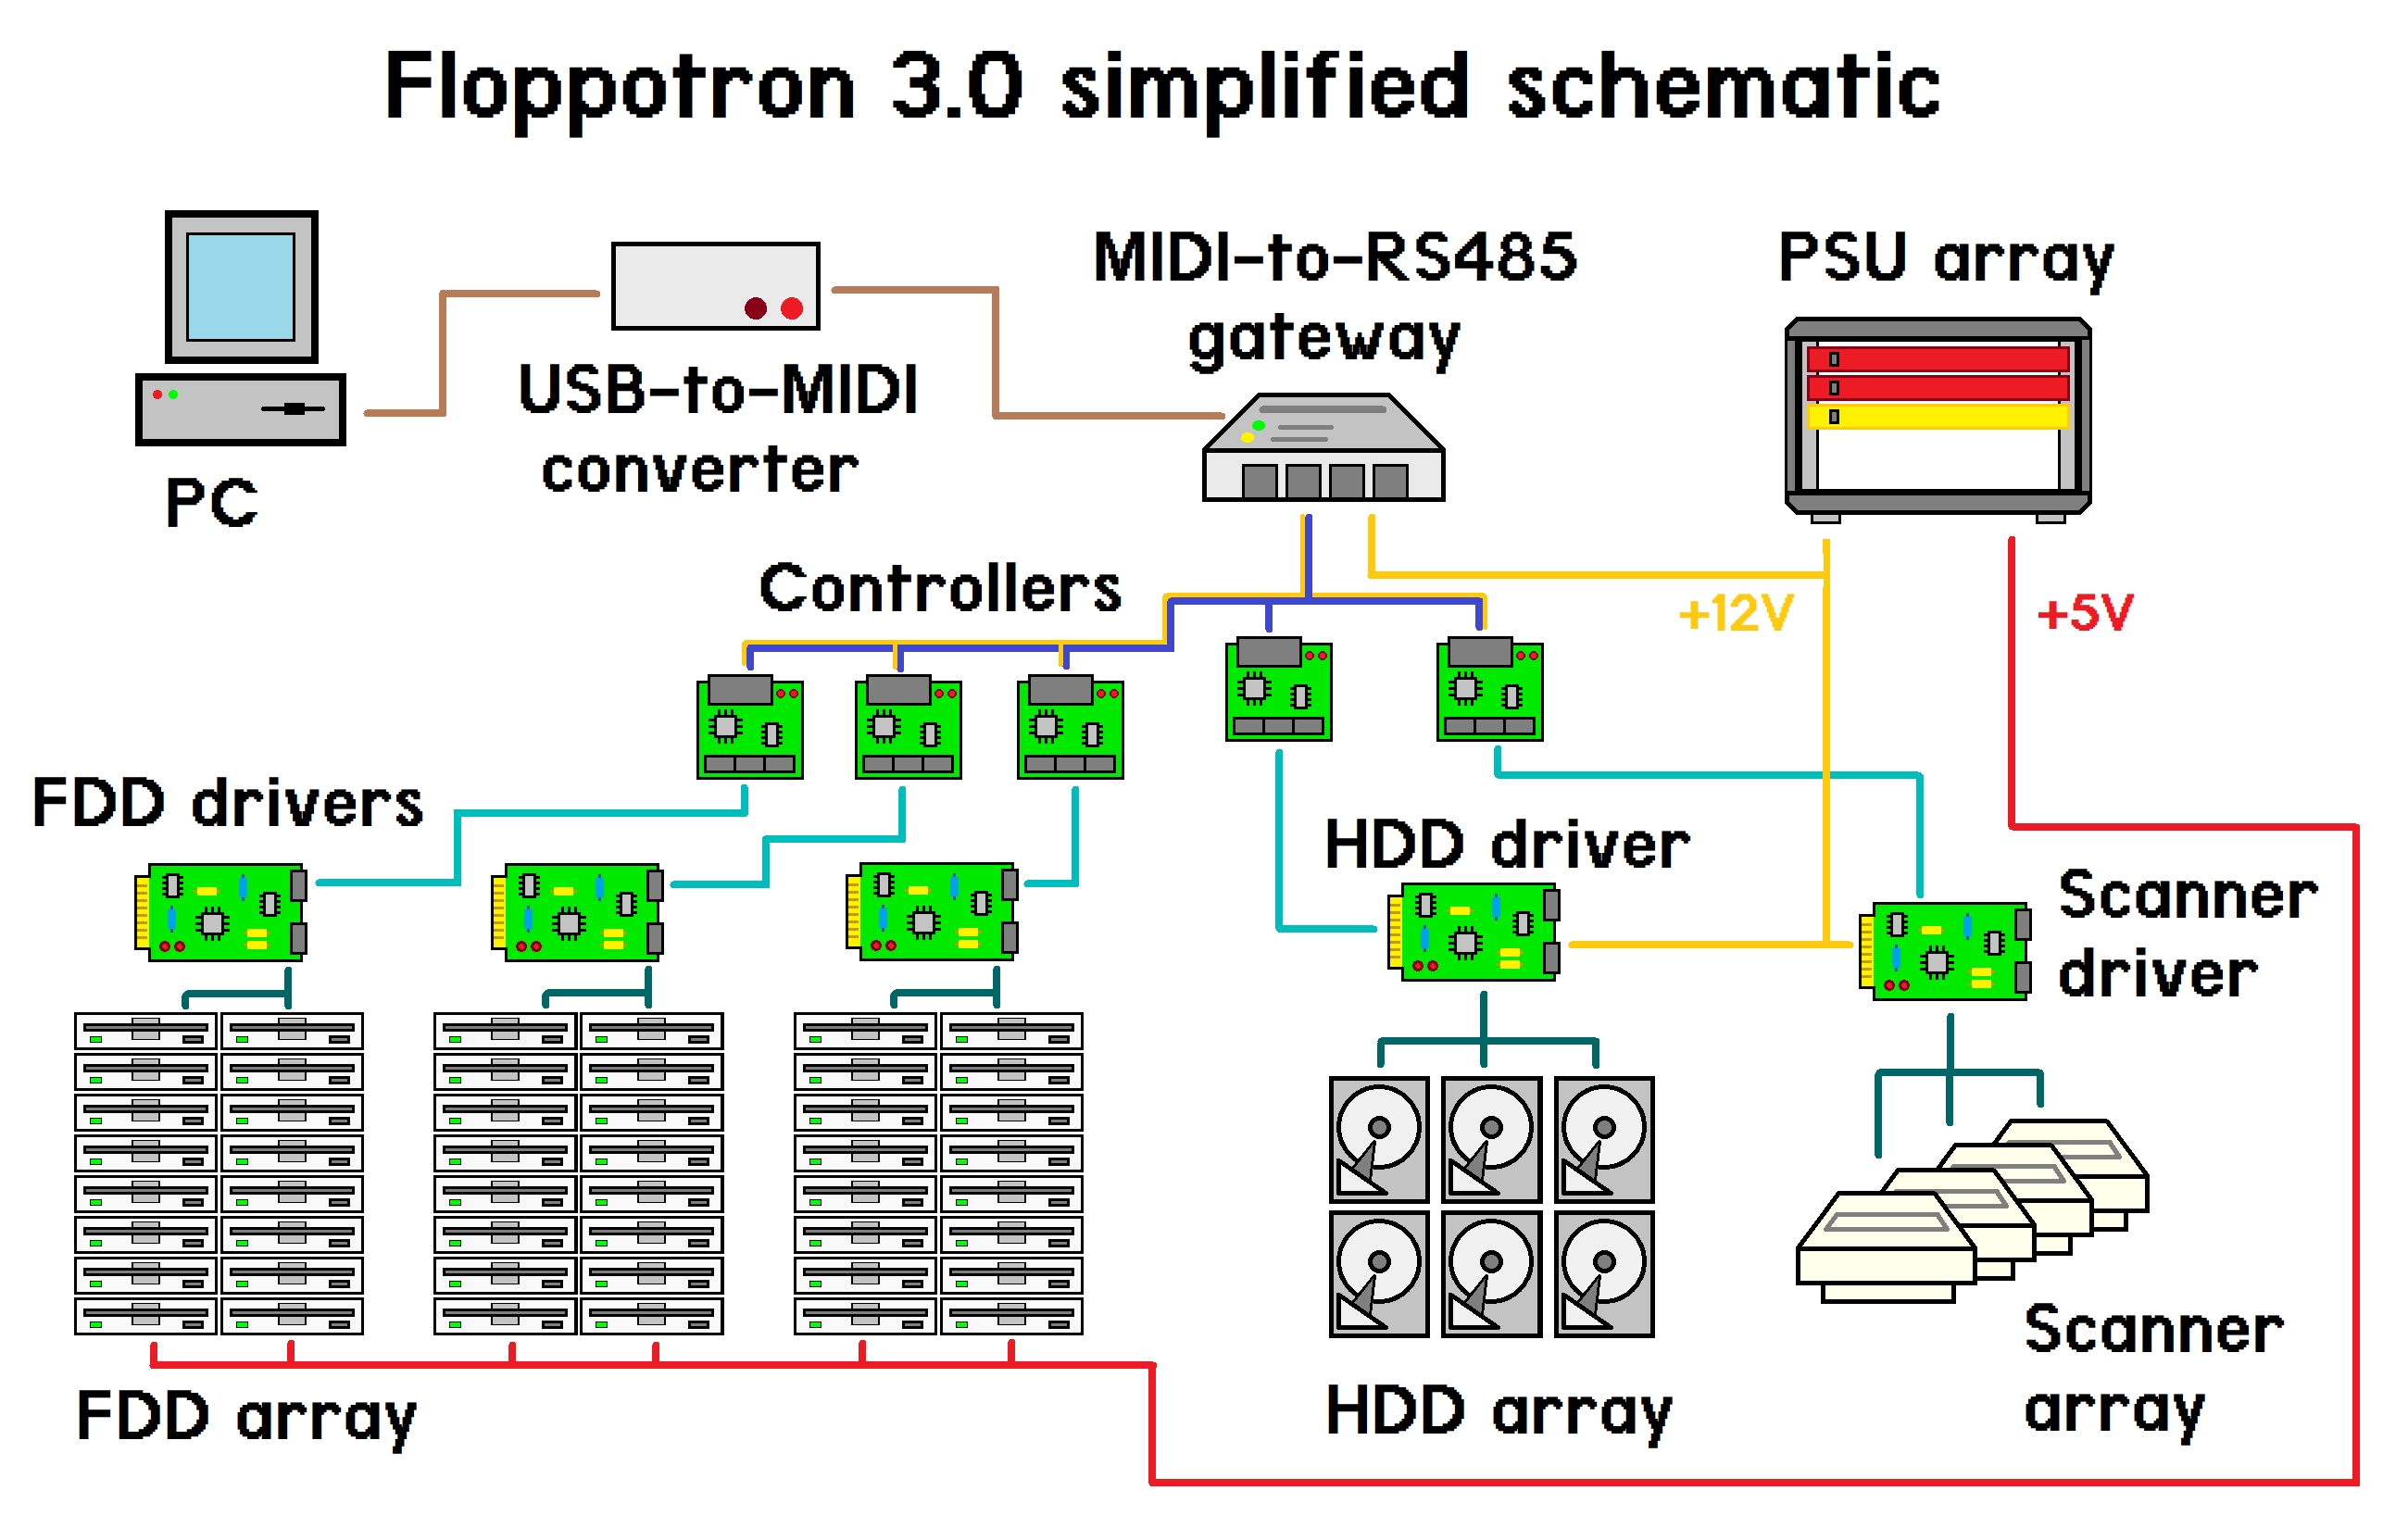 http://silent.org.pl/home/wp-content/uploads/2022/05/floppotron3_schematic.png